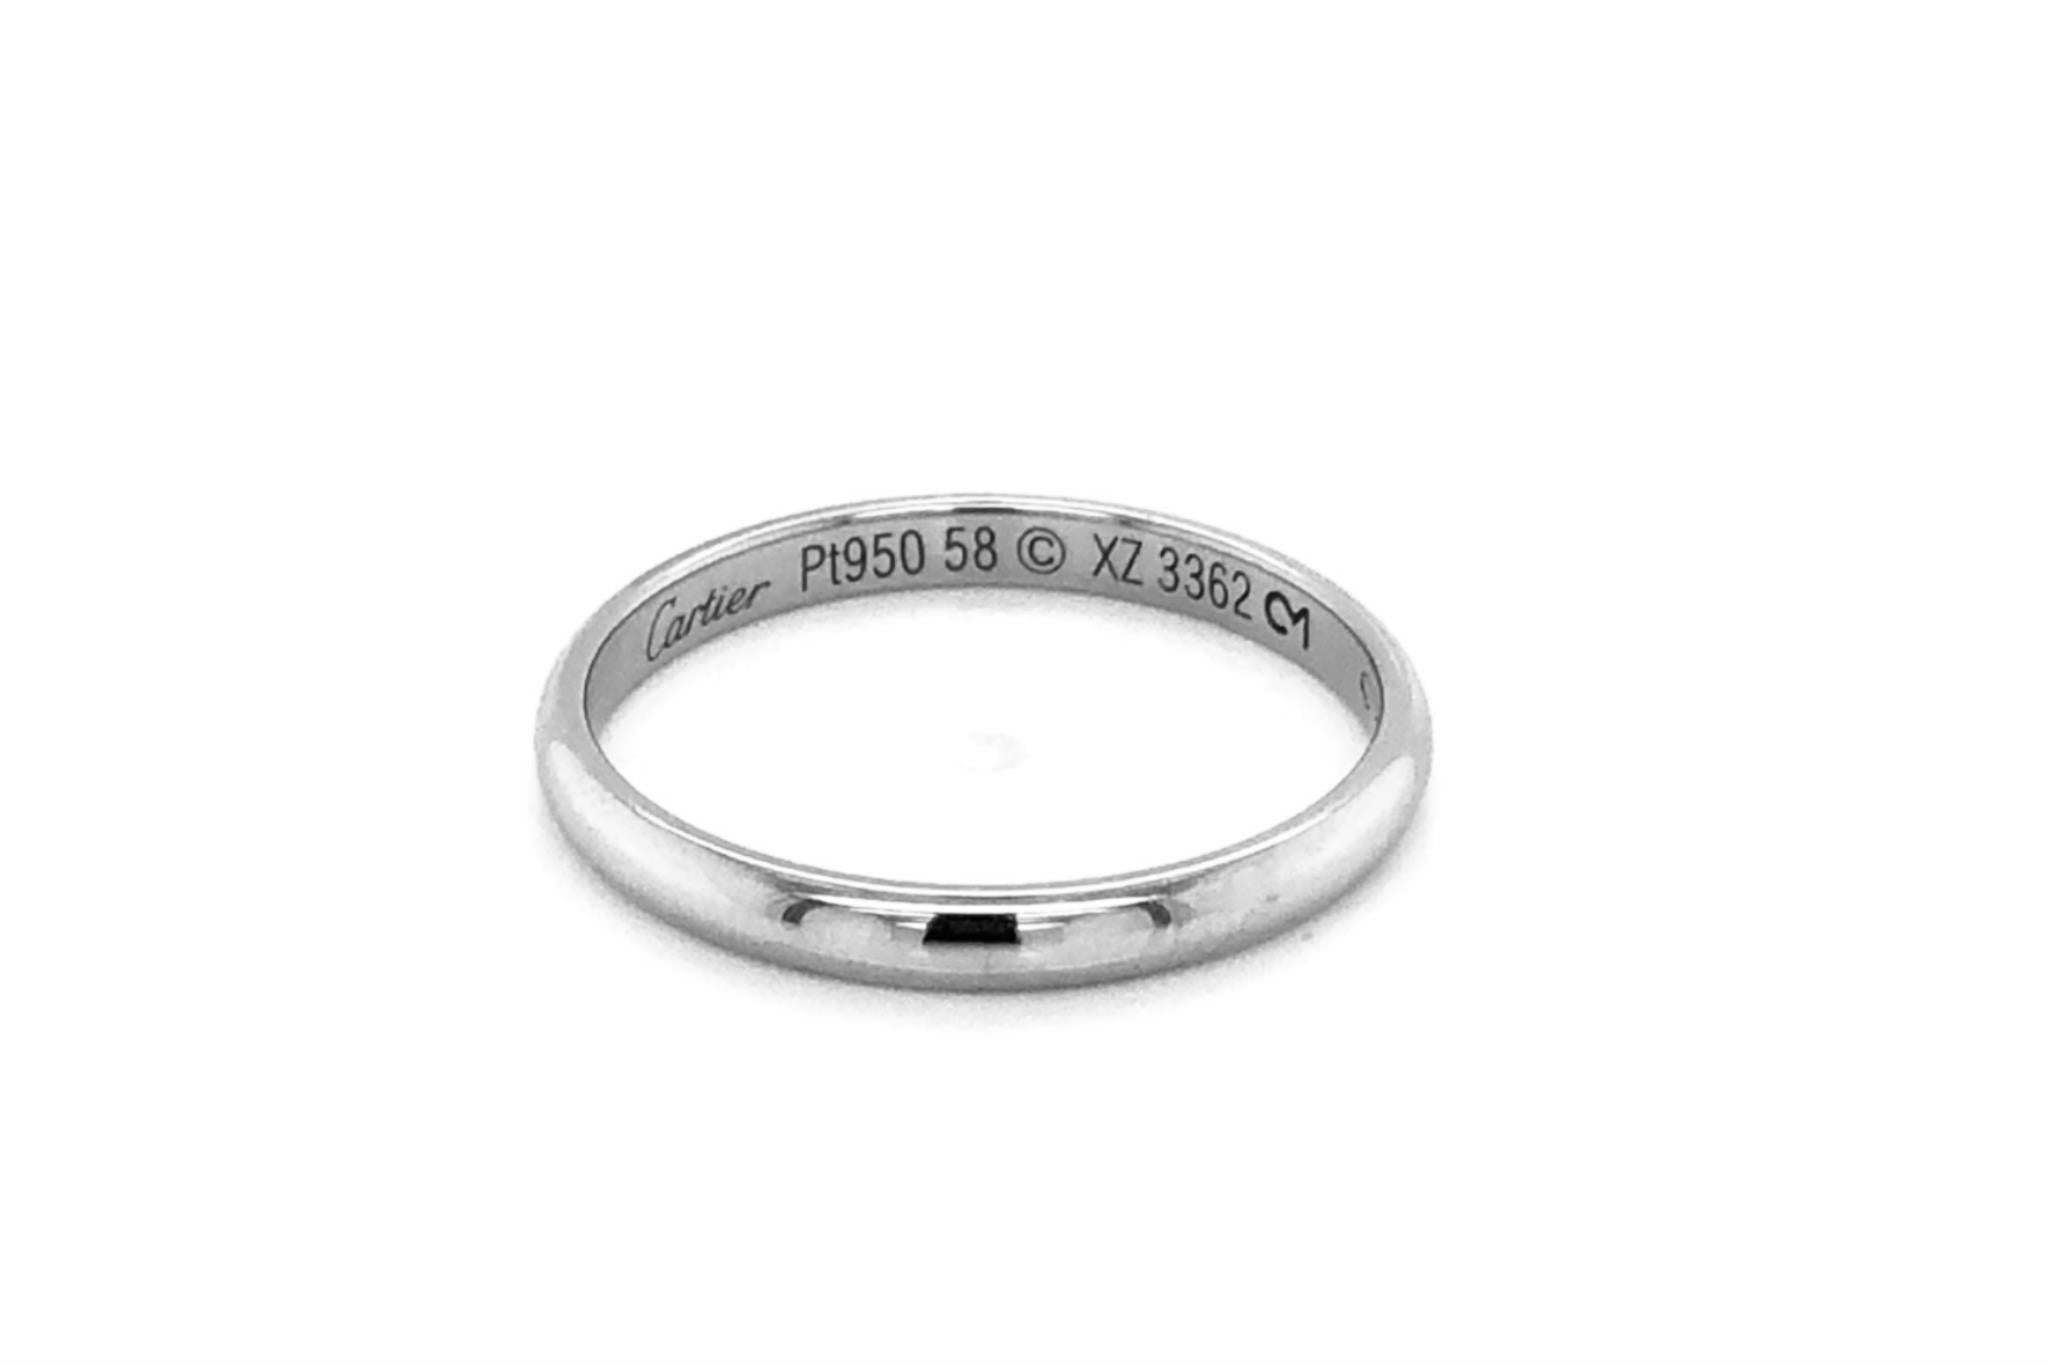 Cartier 1895 Wedding Band Ring Platinum, 2.5 mm Wide Size 8.25